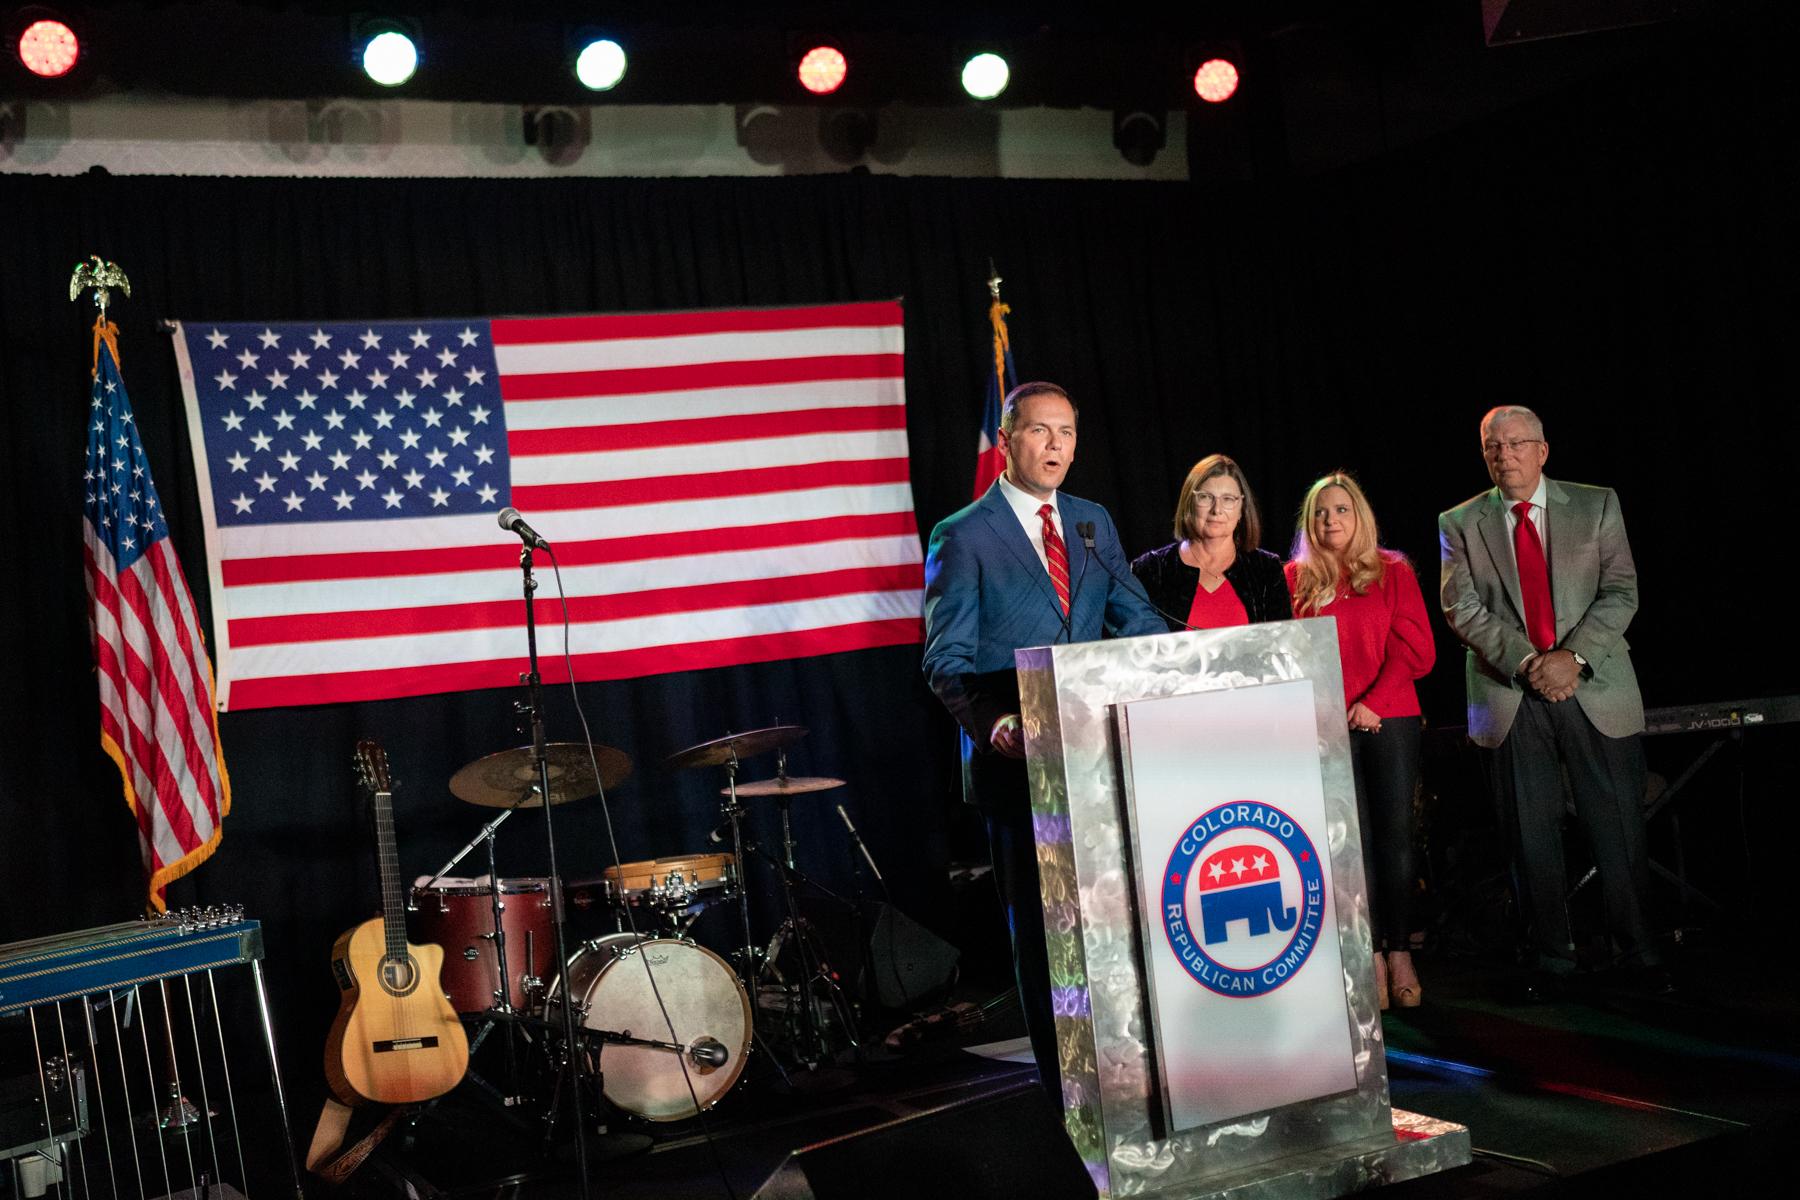 20221108-ELECTION-DAY-GOP-WATCH-PARTY-KELLNER